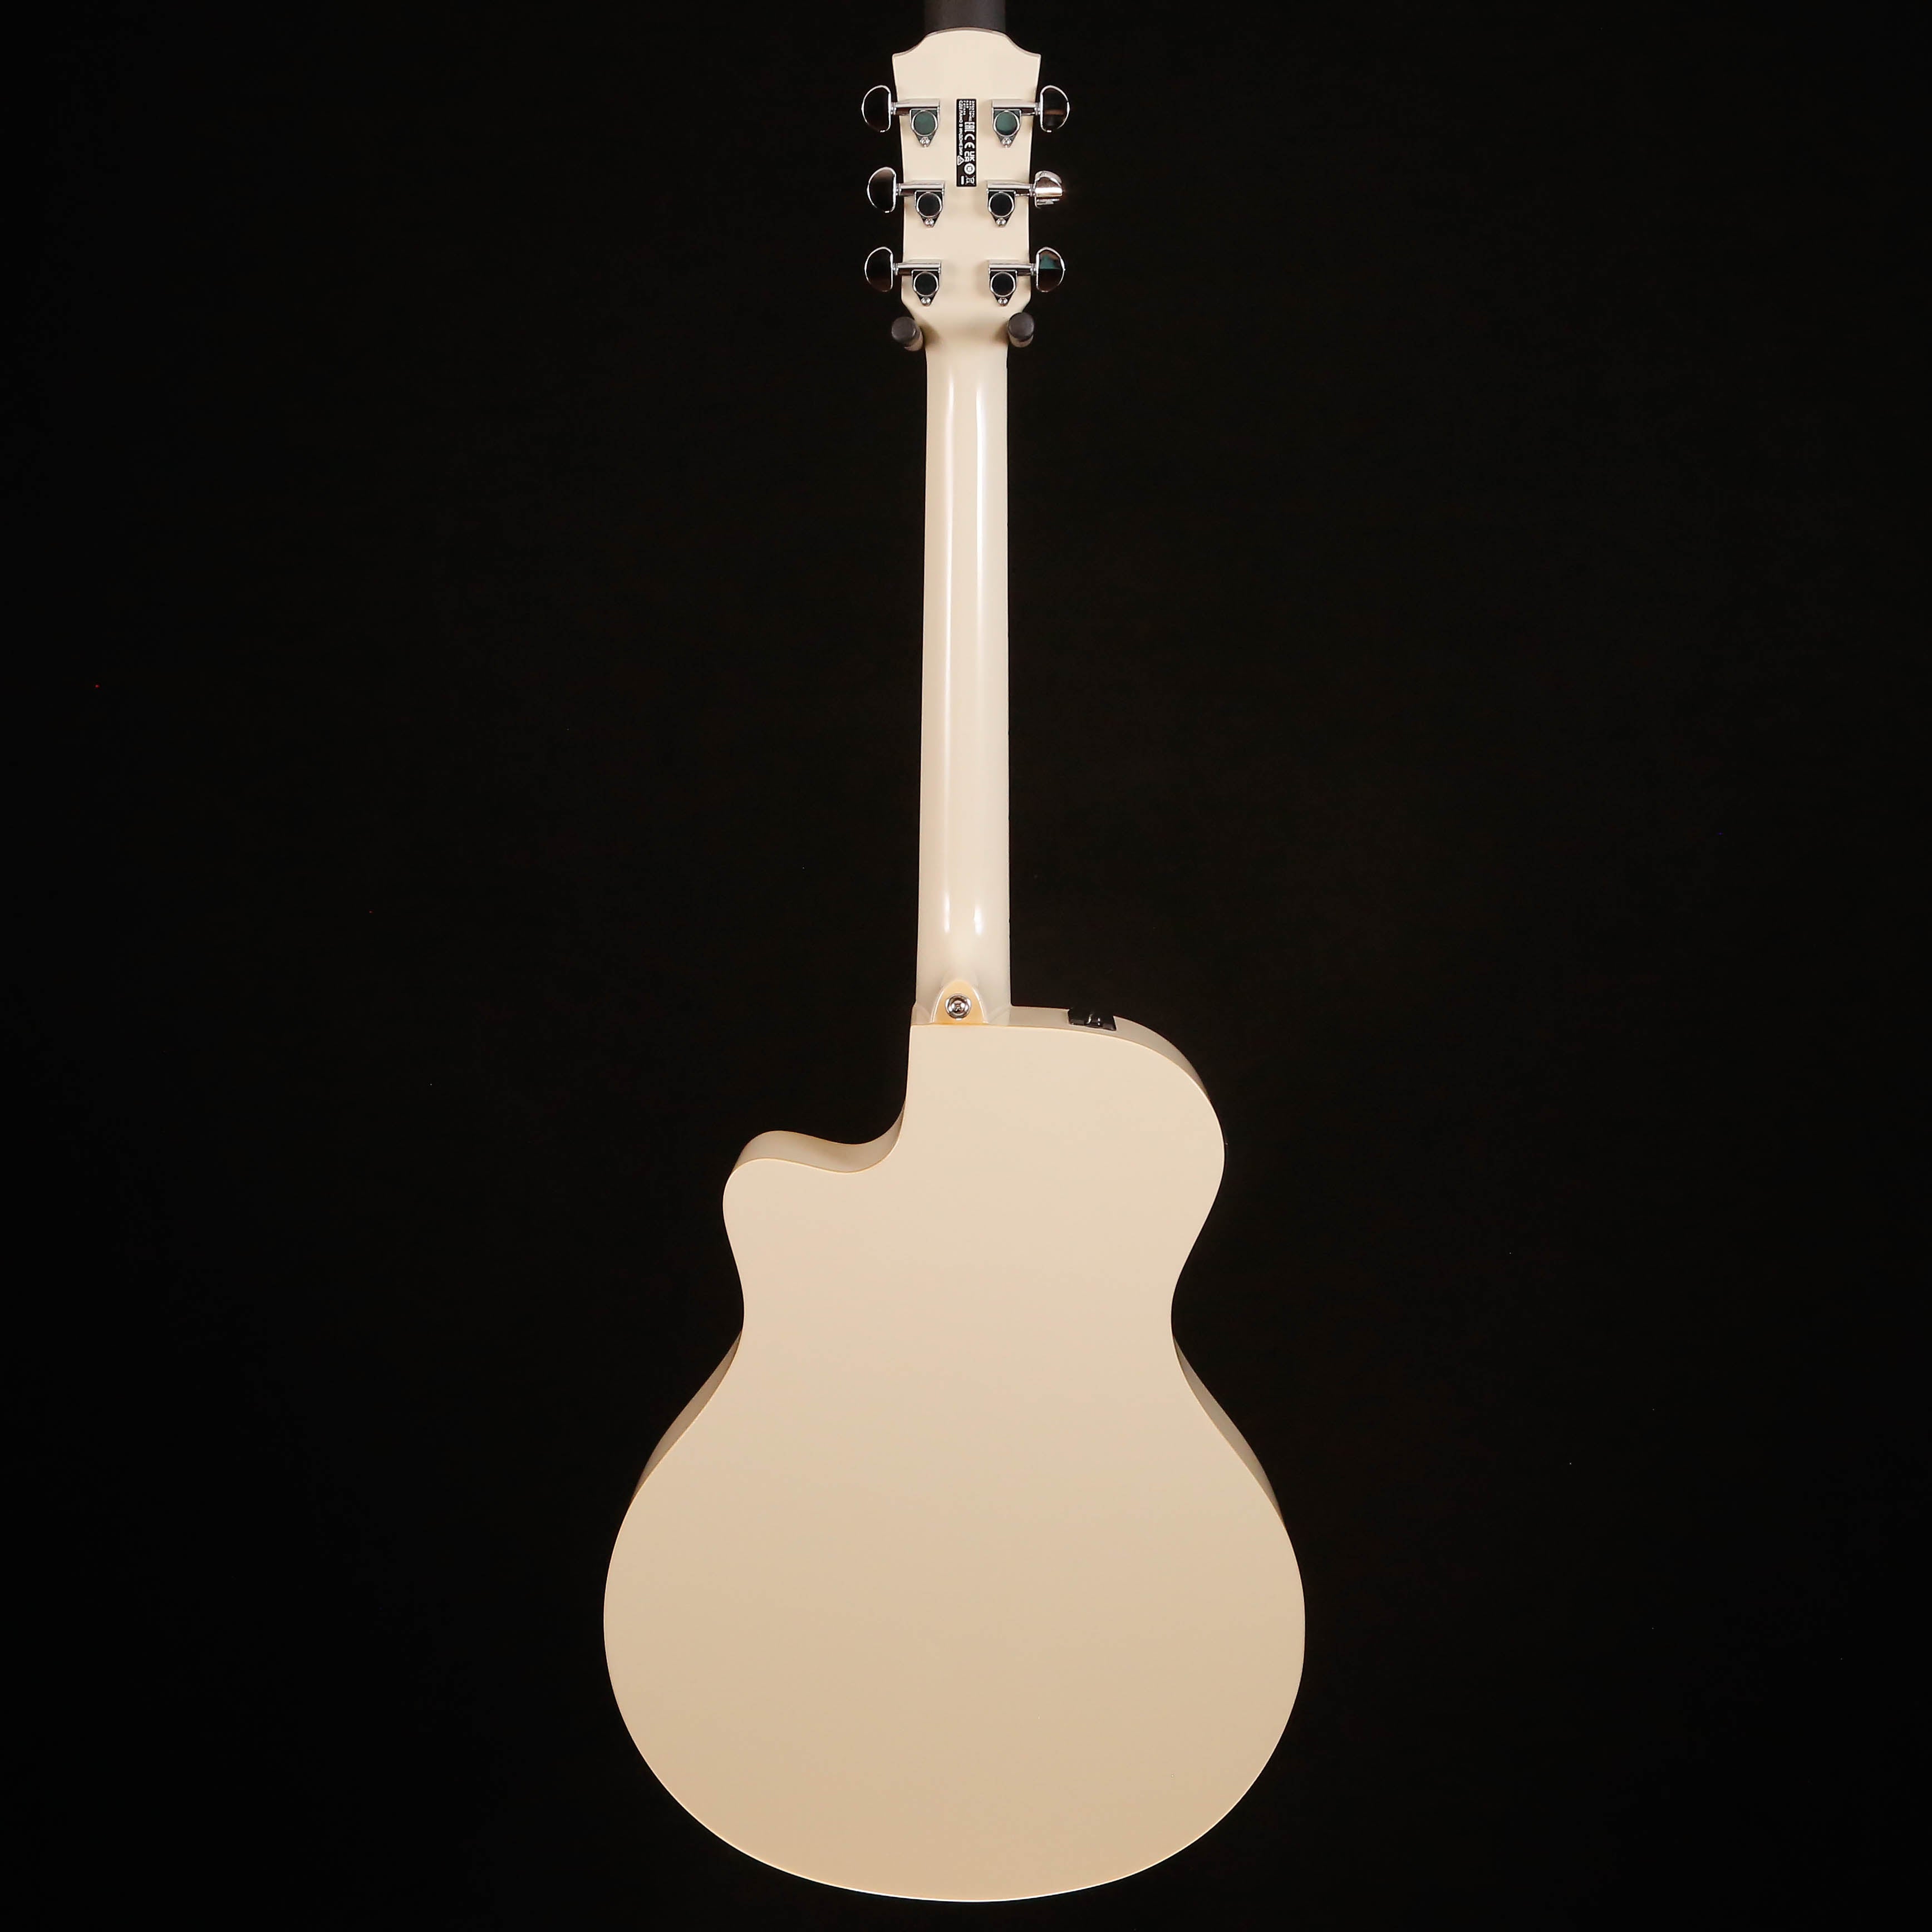 Yamaha APX600 Acoustic/Electric, Vintage White, For Sale